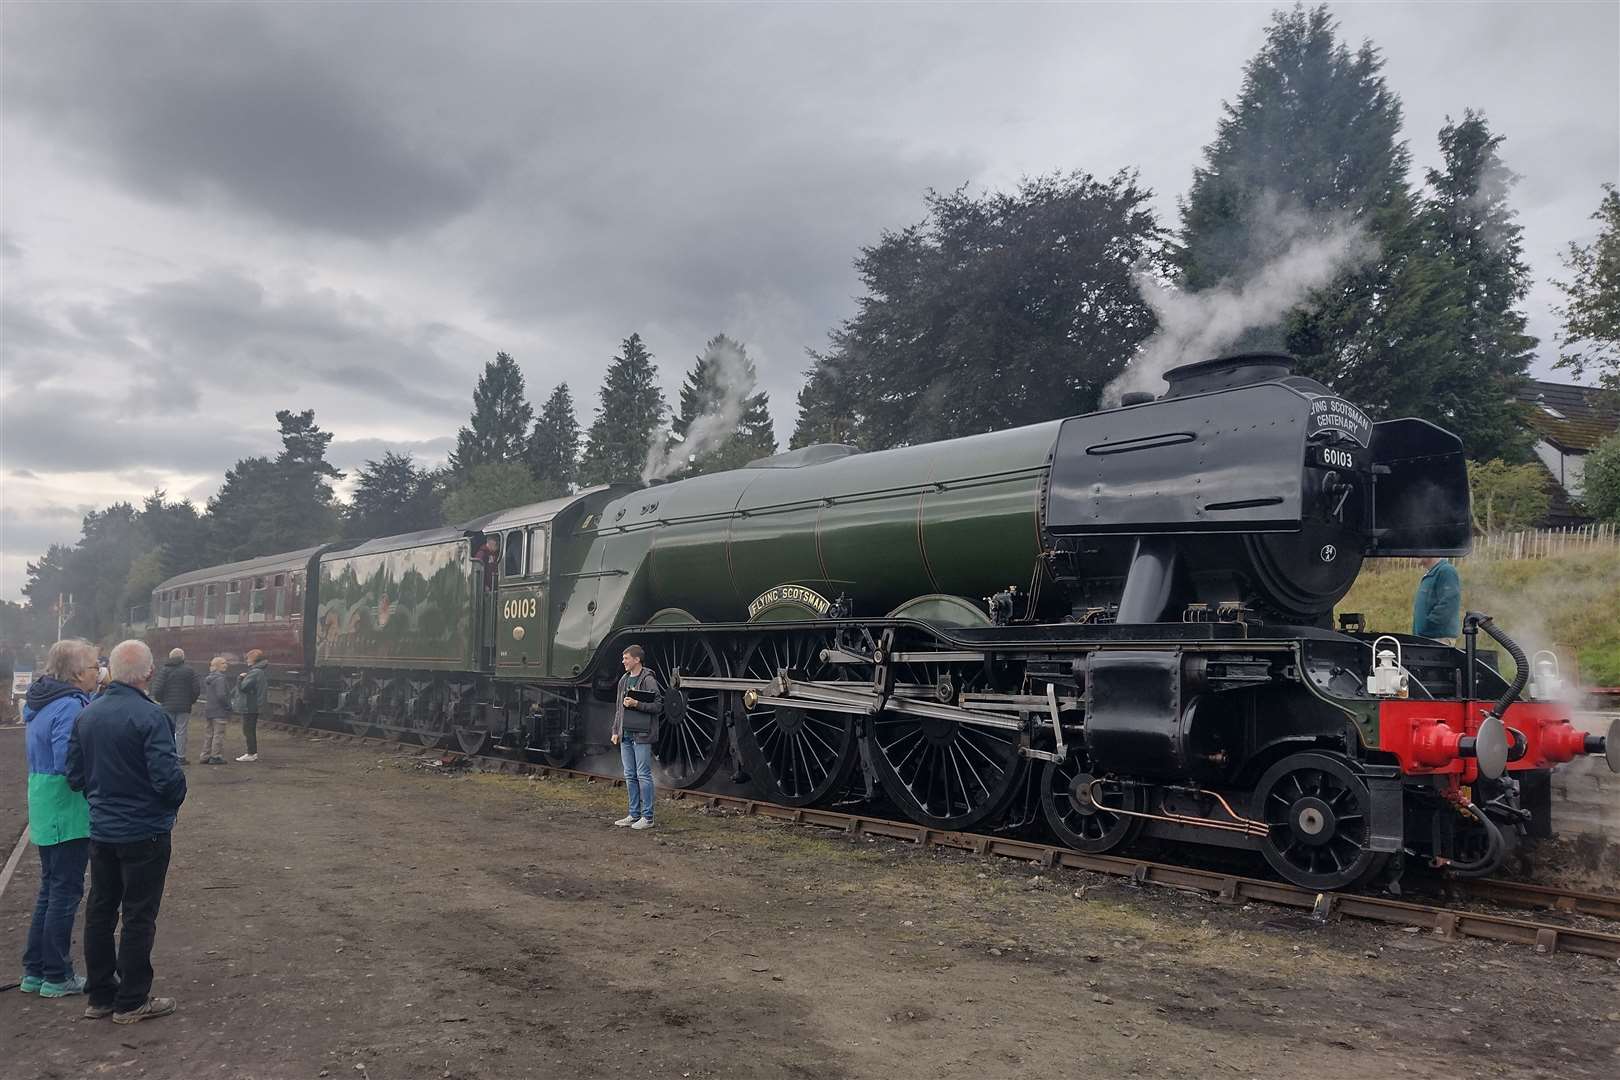 The visit of the world's most famous loco was meant to be a highlight of the year for the Strathspey Railway Company but has turned out to be anything but after the loco was involved in a collision in Aviemore.